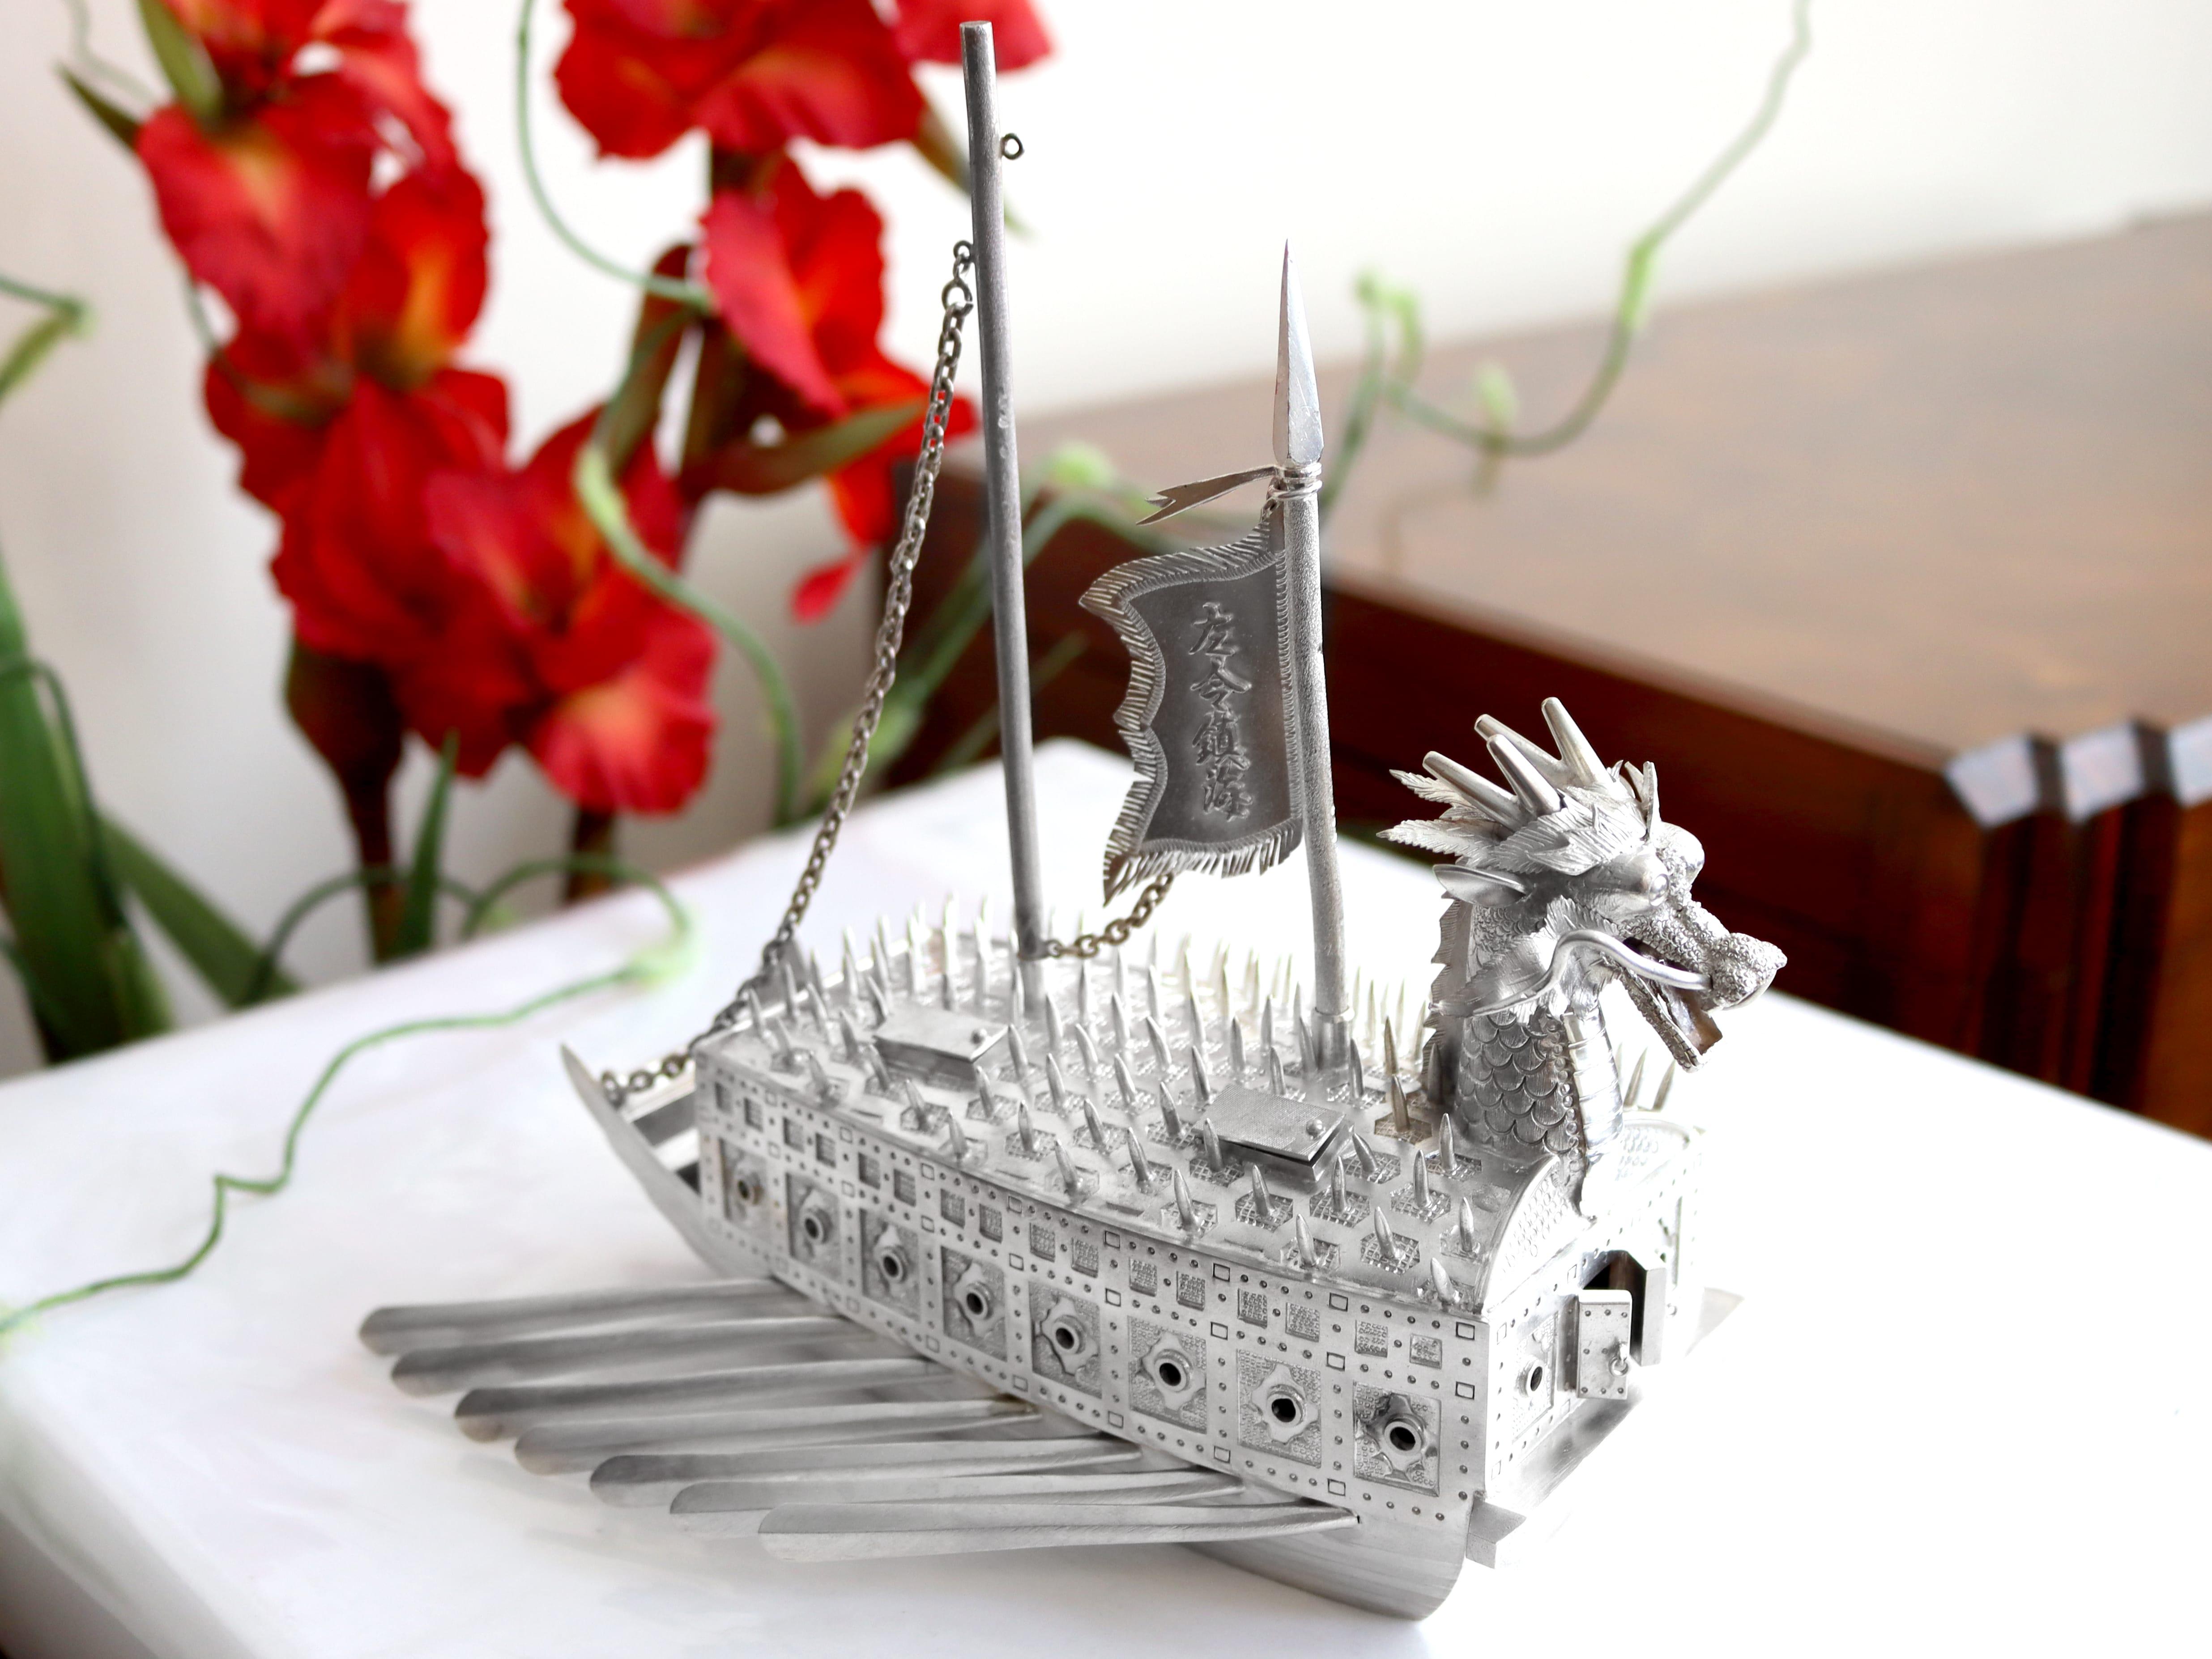 Vintage Chinese Silver Battleship/Wugongchuan Ornament Circa 1990 In Excellent Condition For Sale In Jesmond, Newcastle Upon Tyne